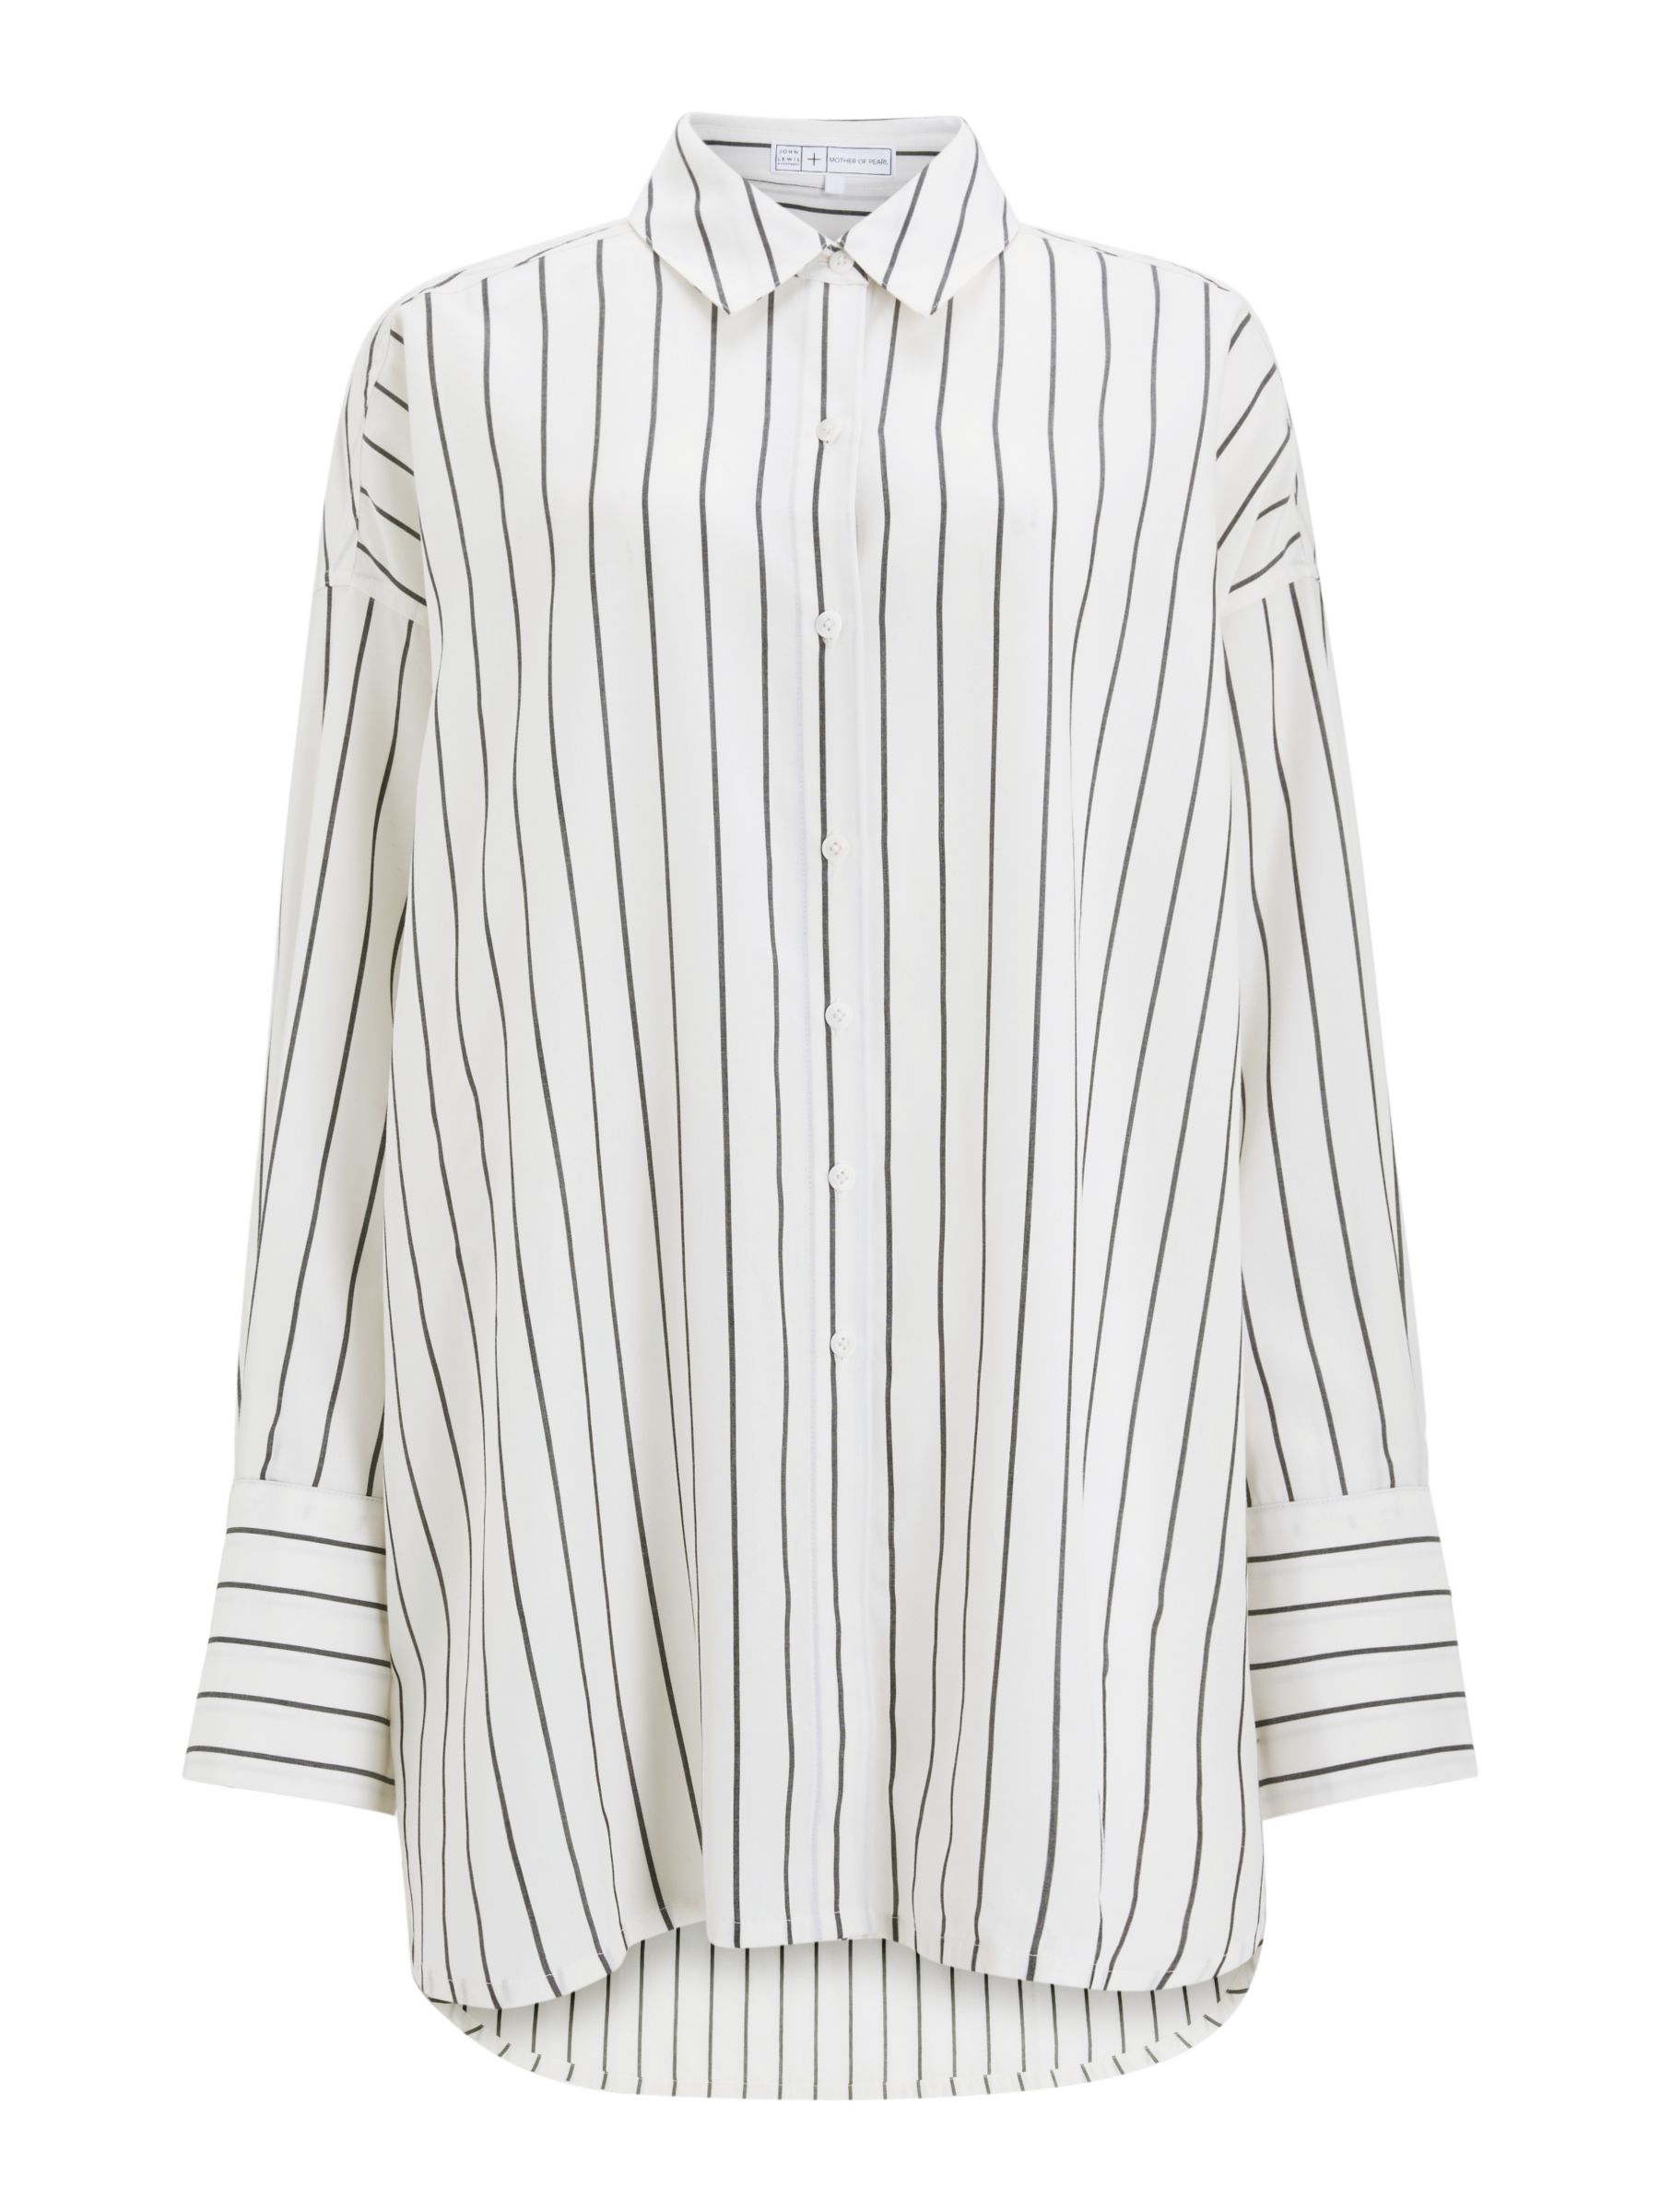 Mother of Pearl Tencel™ Stripe Shirt, Ivory/Navy